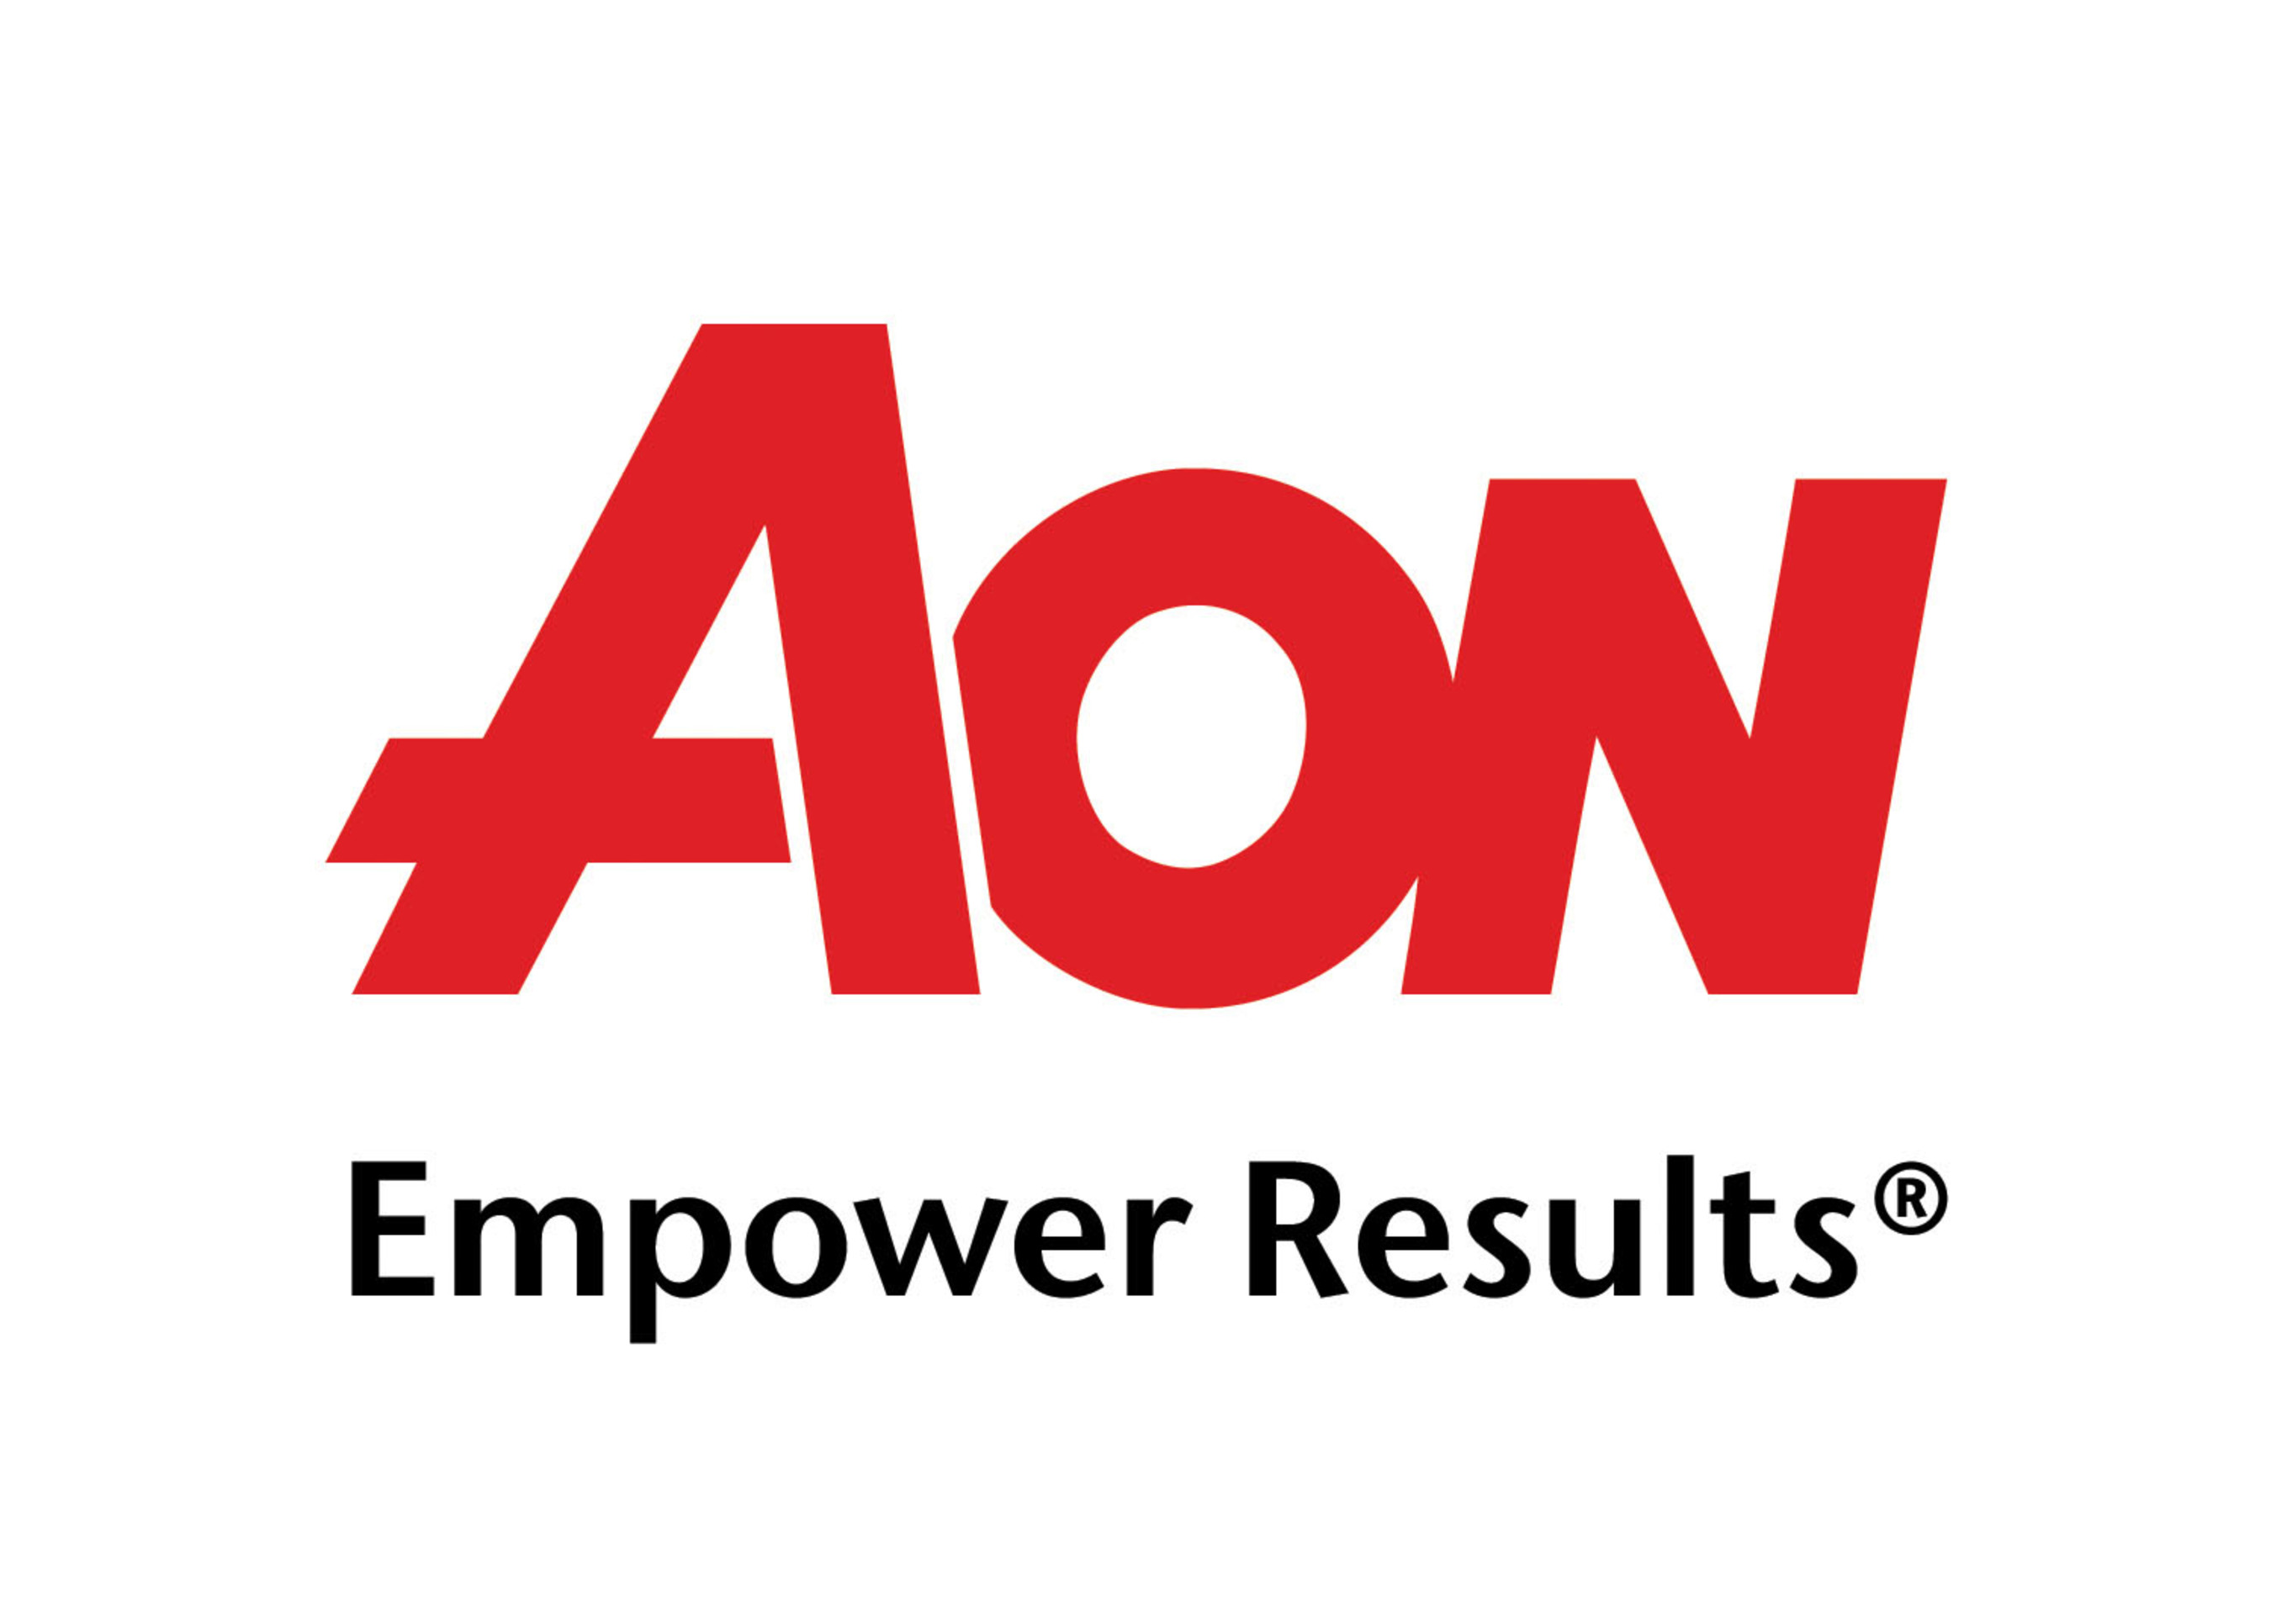 Aon plc (http://www.aon.com) is a leading global provider of risk management, insurance brokerage and reinsurance brokerage, and human resources solutions and outsourcing services. Through its more than 69,000 colleagues worldwide, Aon unites to empower results for clients in over 120 countries via innovative risk and people solutions. For further information on our capabilities and to learn how we empower results for clients, please visit: http://aon.mediaroom.com.